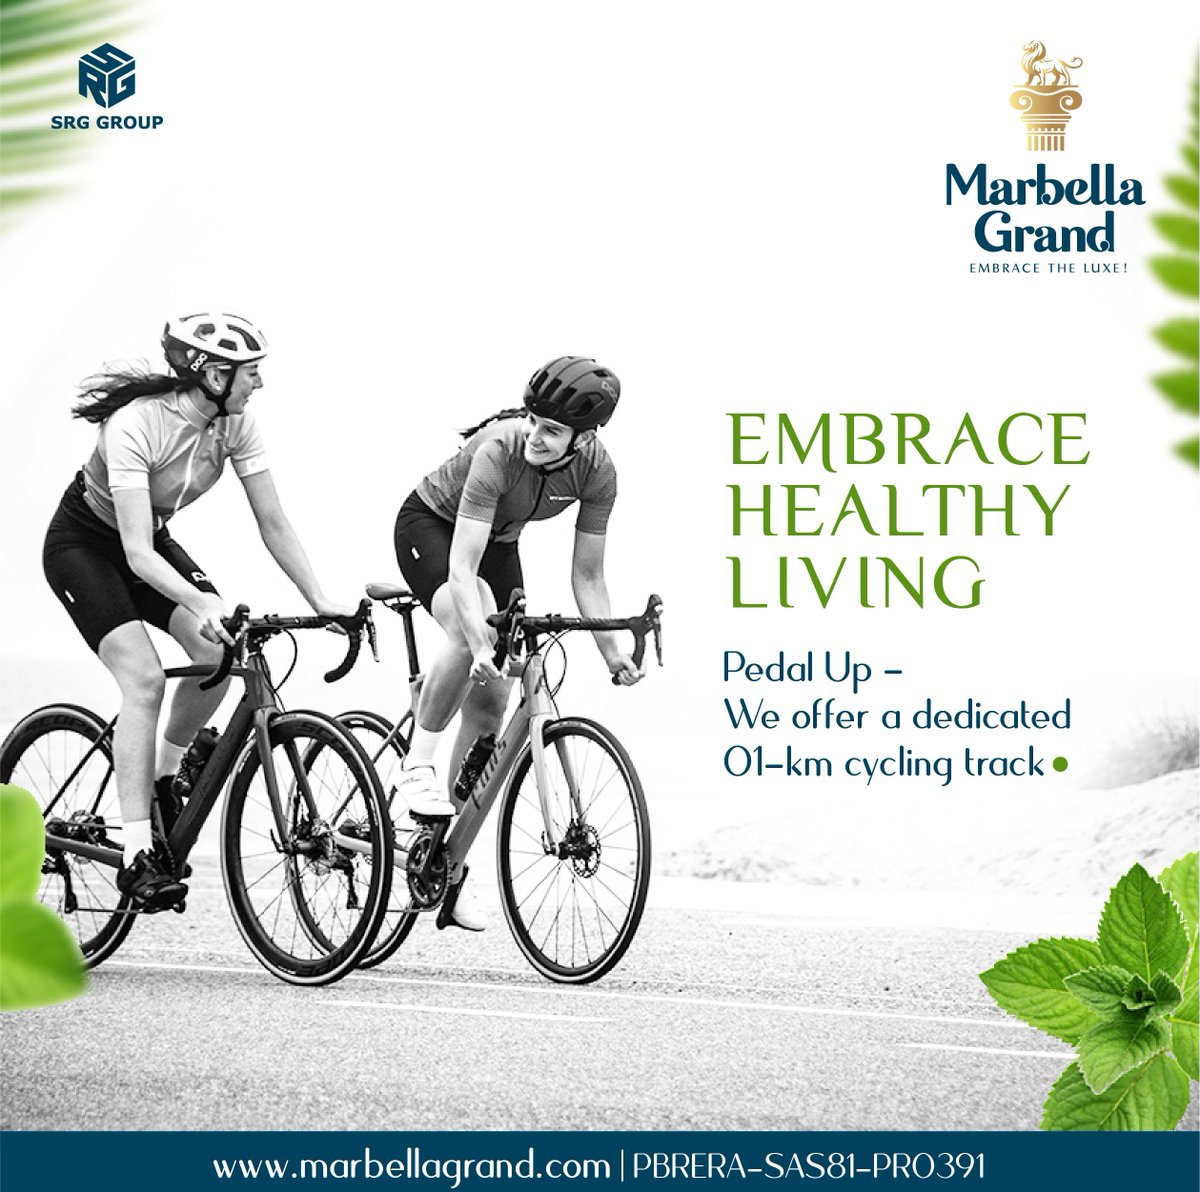 A ‘cyclist only’ track gives every reason to pedal-up and live healthily. 
#health #goodhealth #fitnessmantra #cycling #healthyLiving #greenSurroundings #cleanEnvironment #luxuroiusApartments #MarbellaGrand